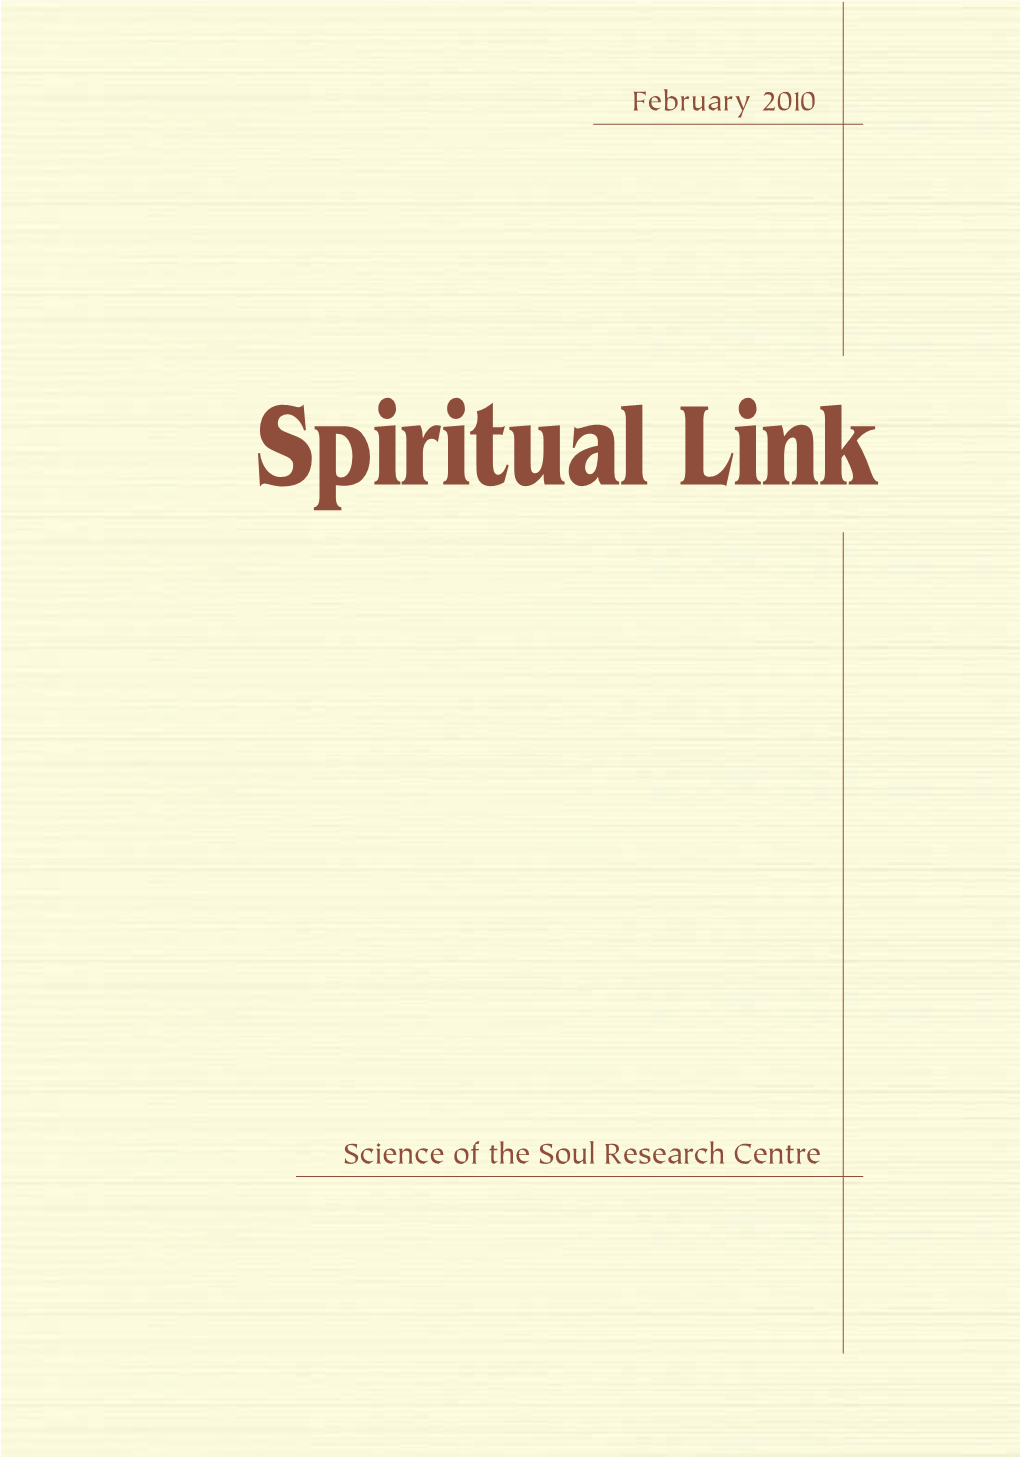 Spiritual Link February 2010 3 Our Mission Statement